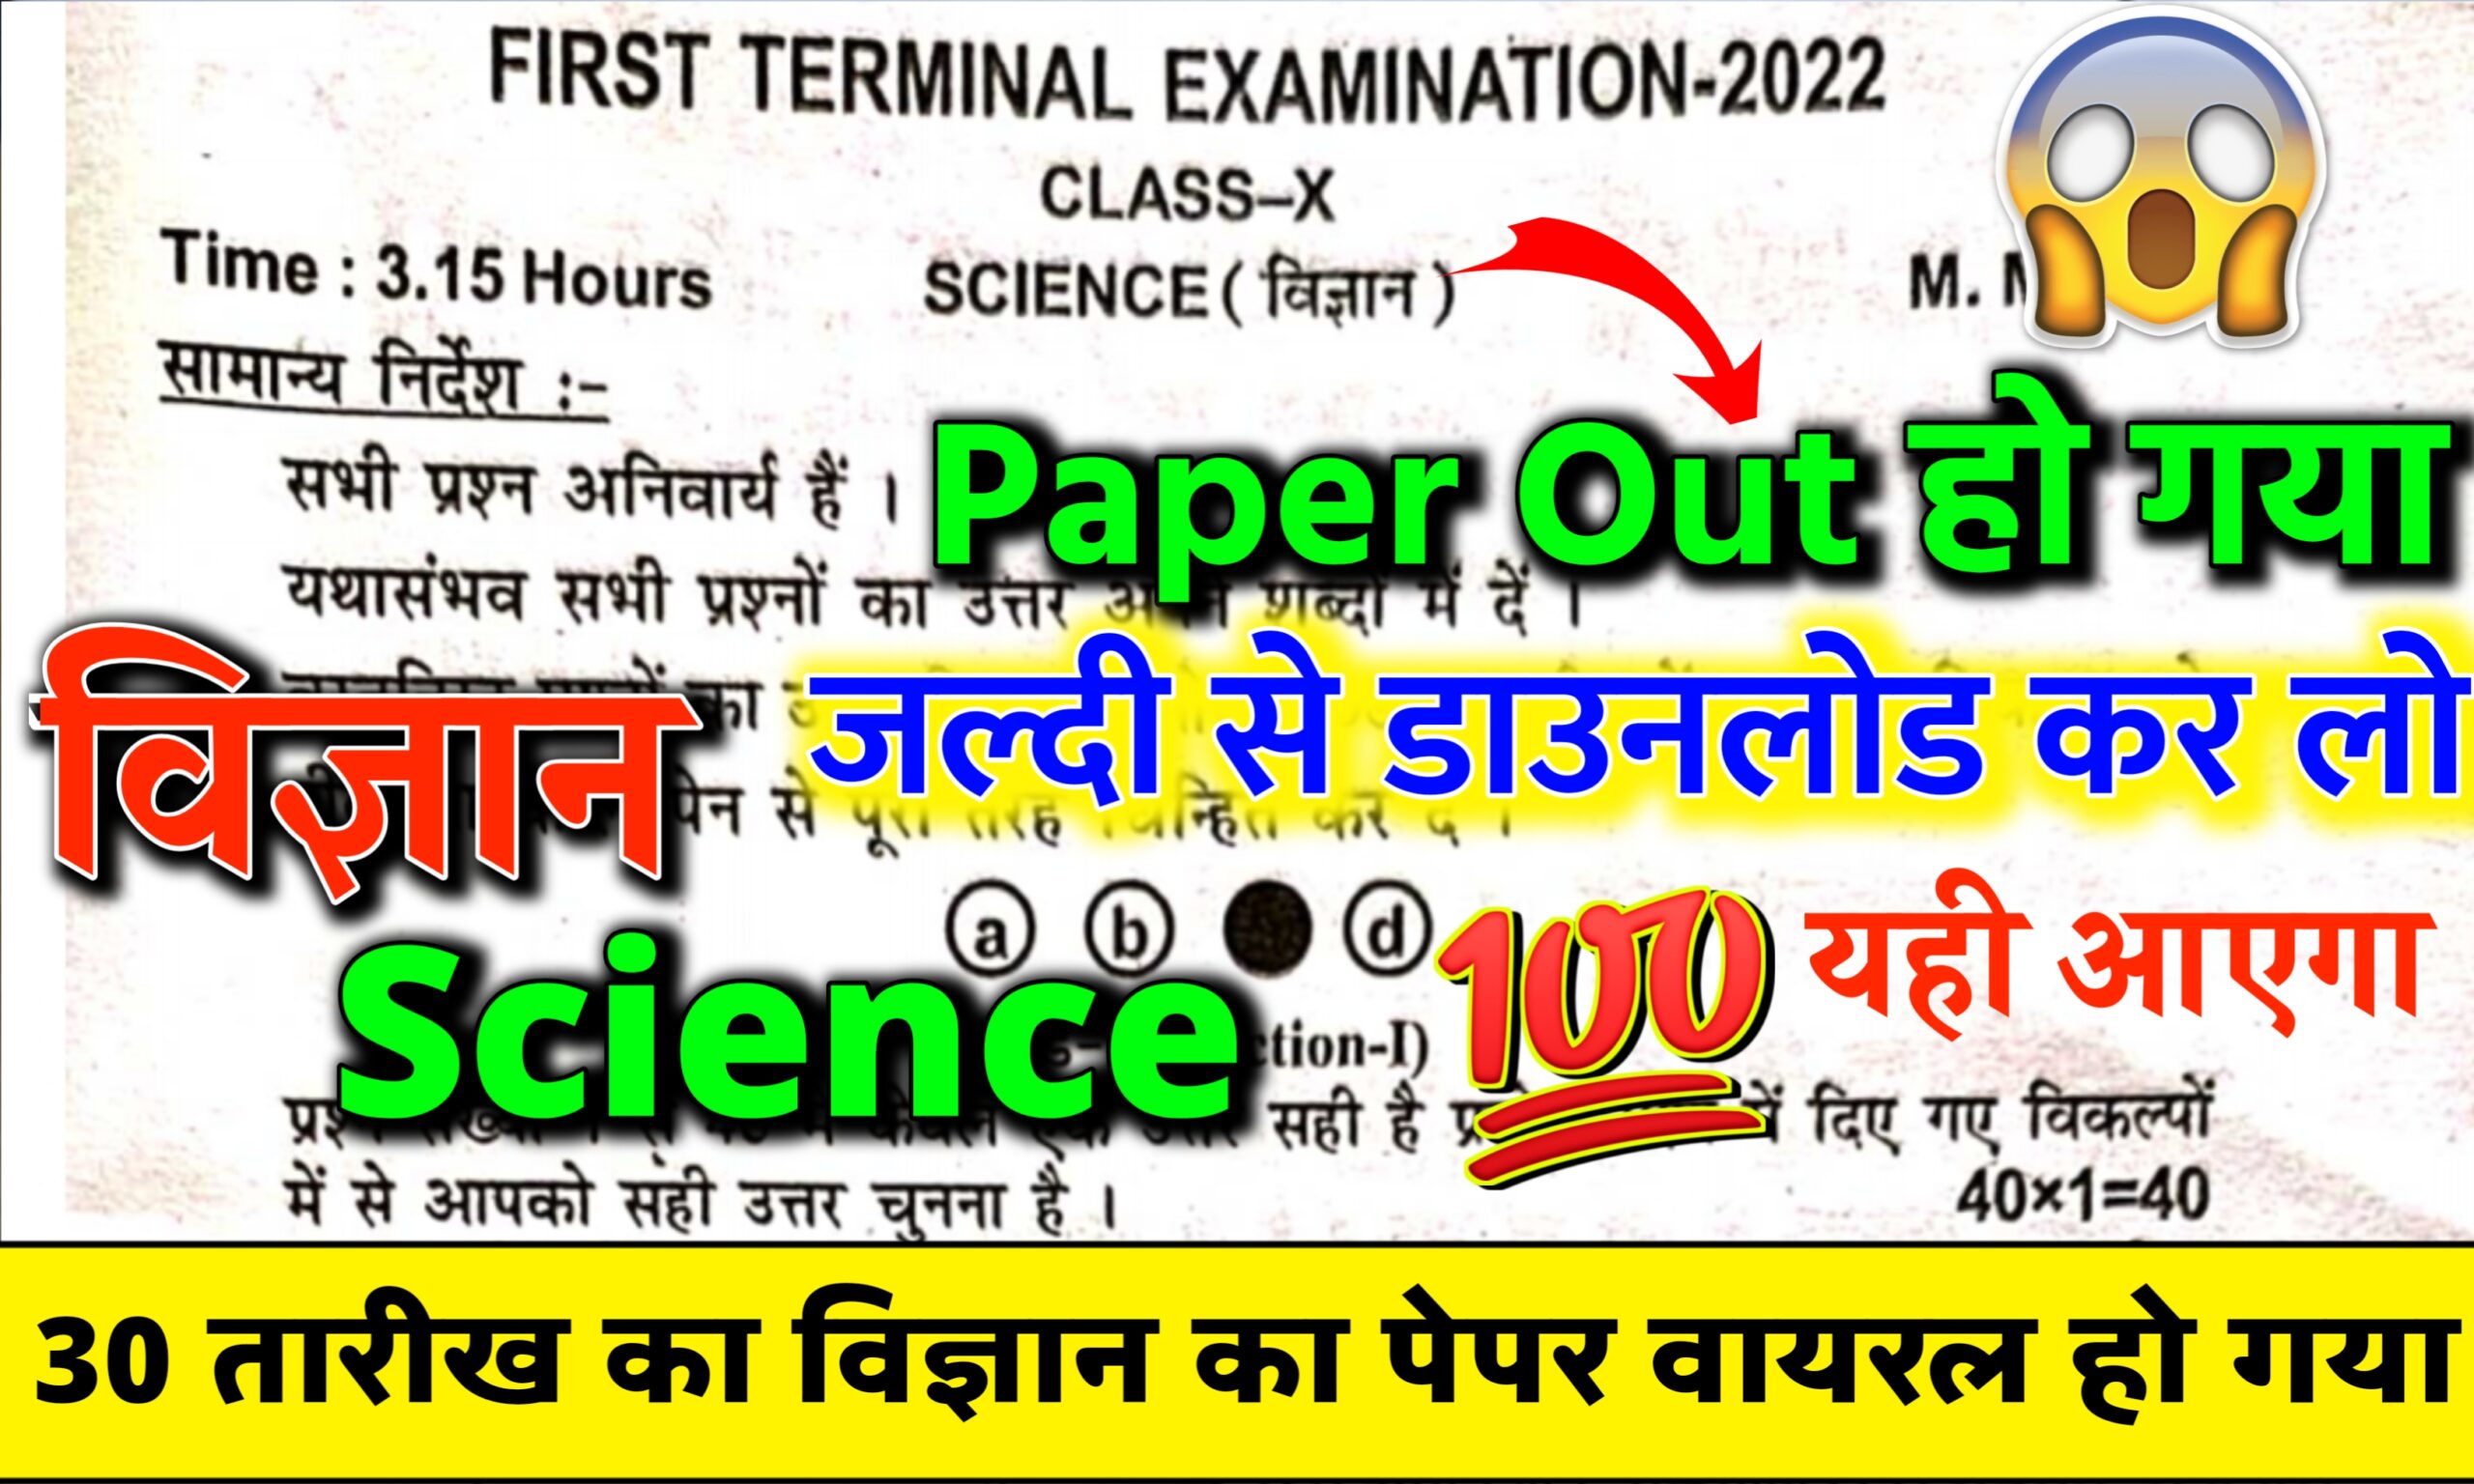 10th Science Question Paper First Terminal Exam -2022